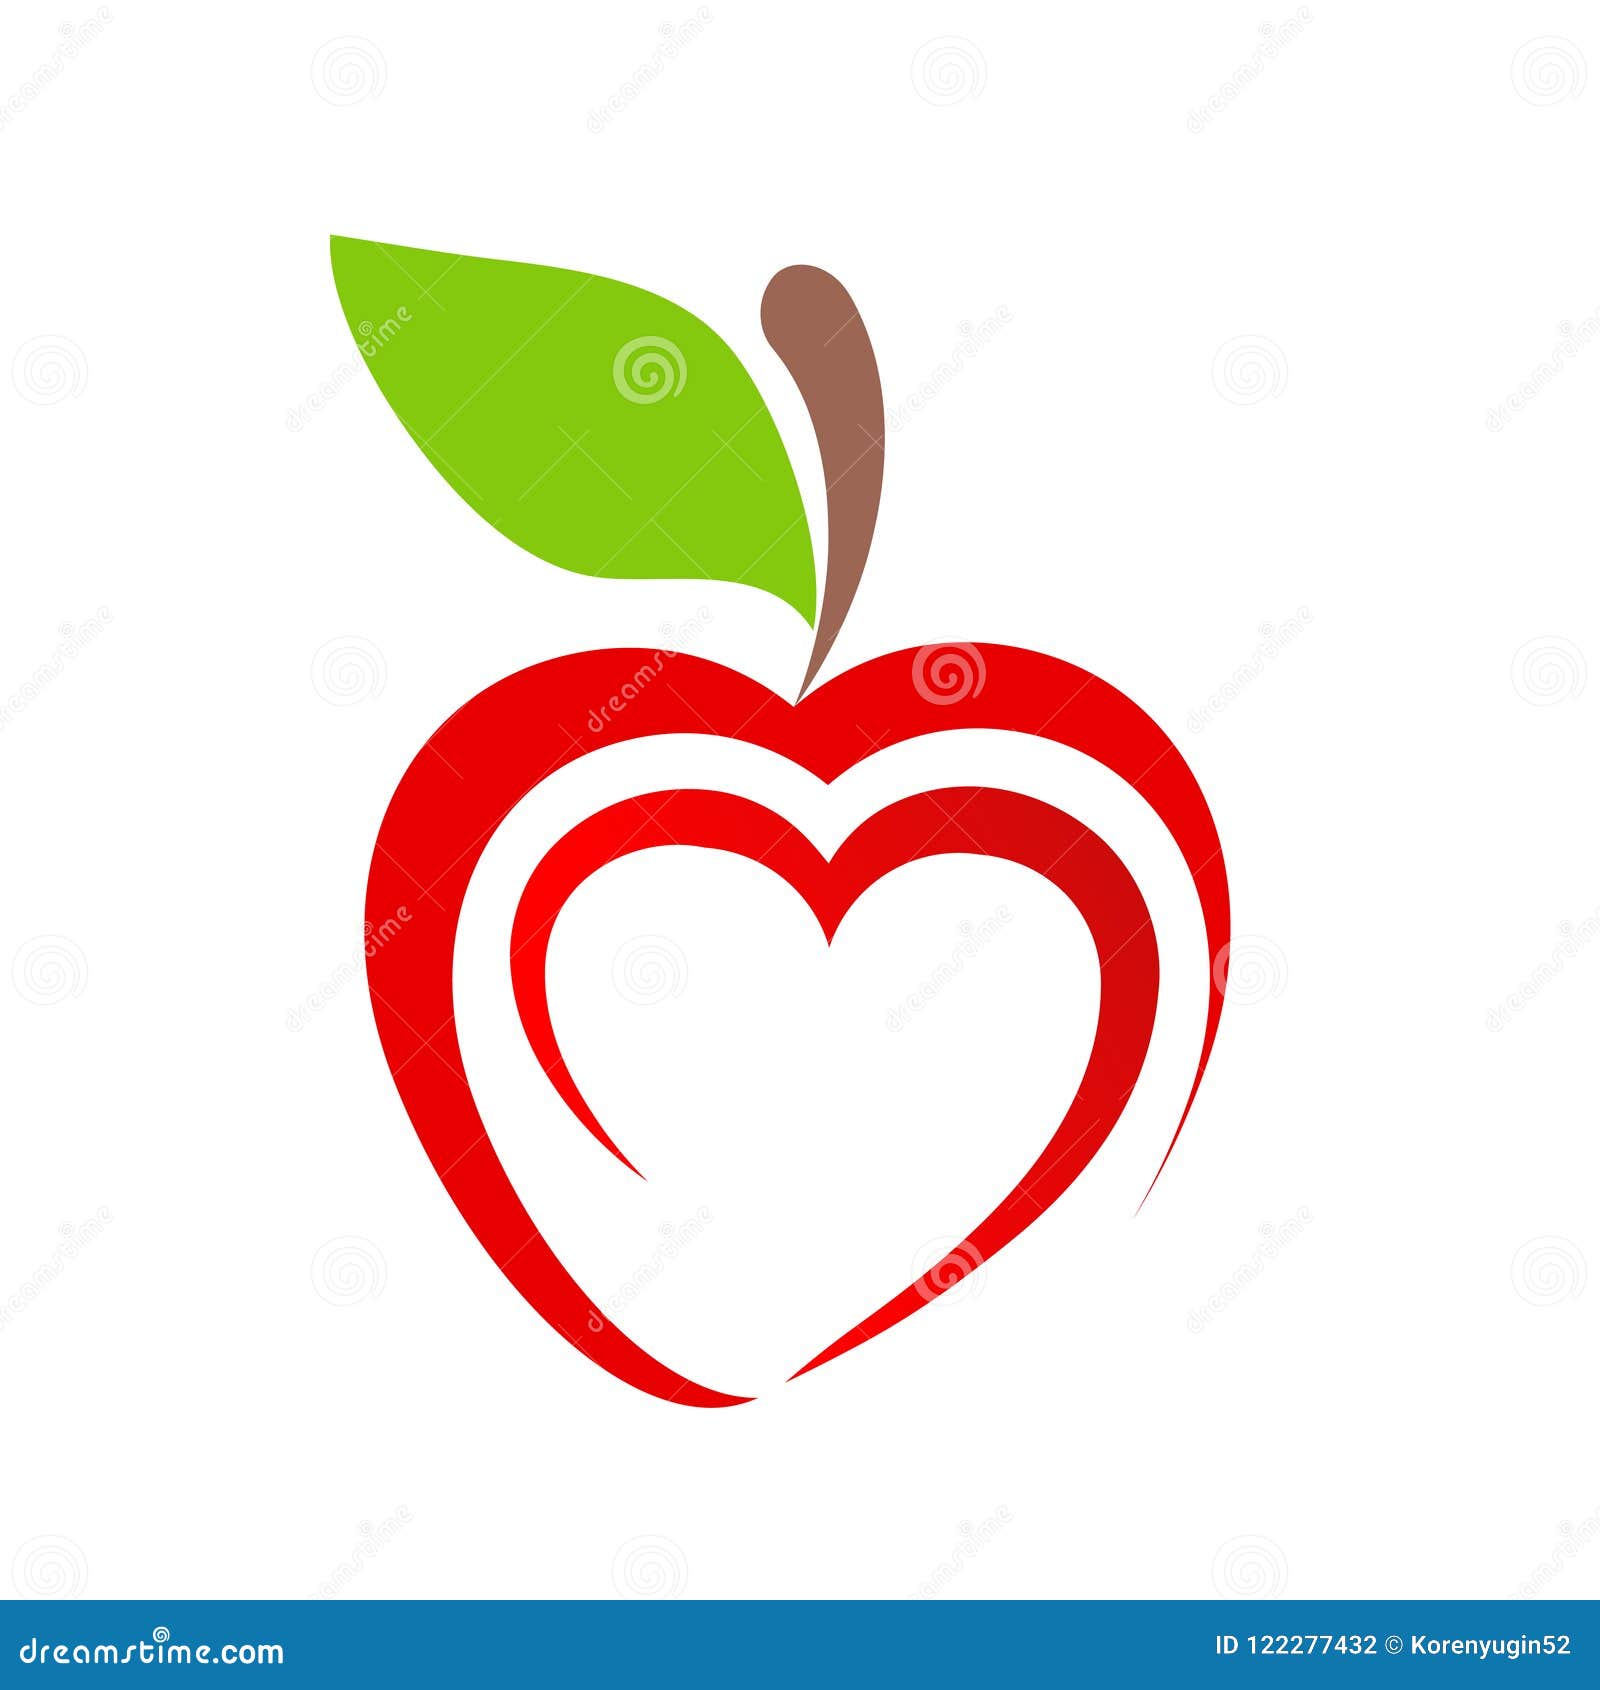 Download Red Apple Fruit Icon With Heart Symbol On White, Stock ...